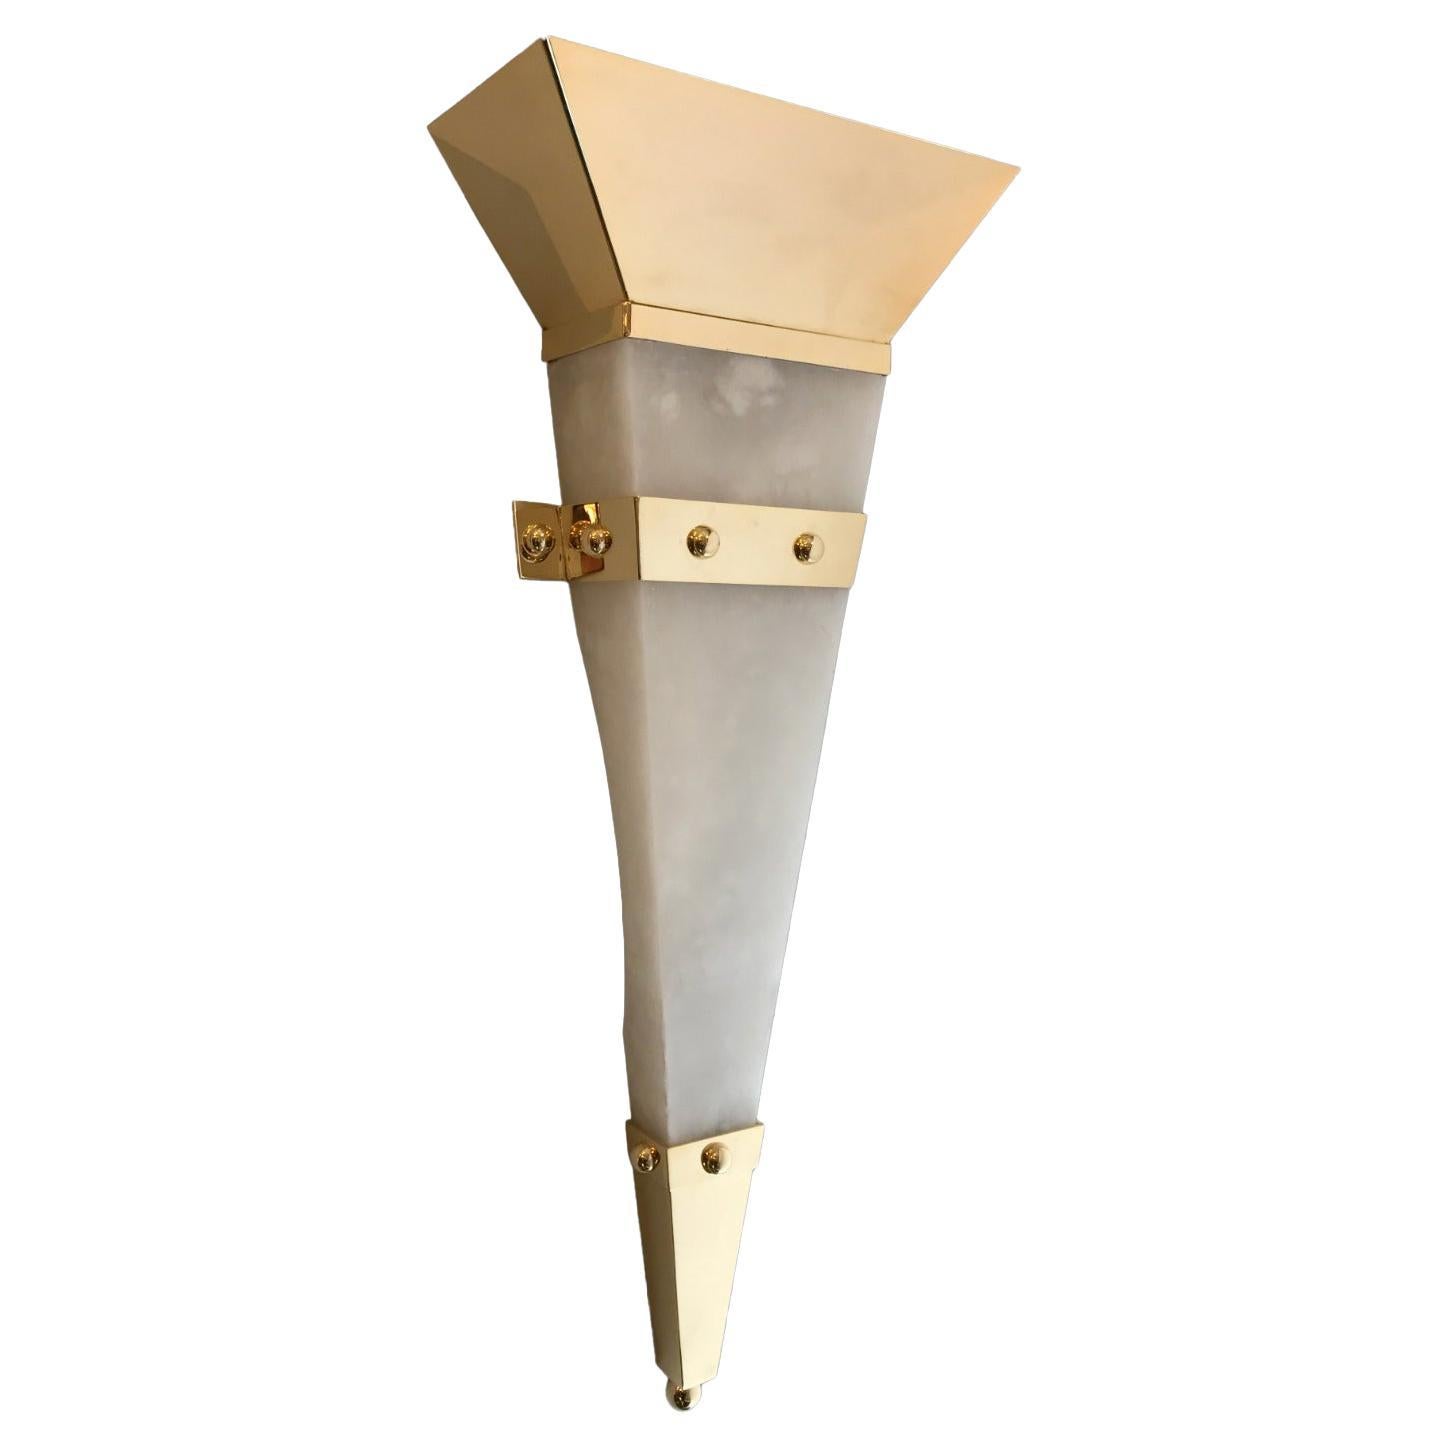 Christian Caudron, Contemporary Sconce, Alabaster, Brass, Gilded with Fine Gold